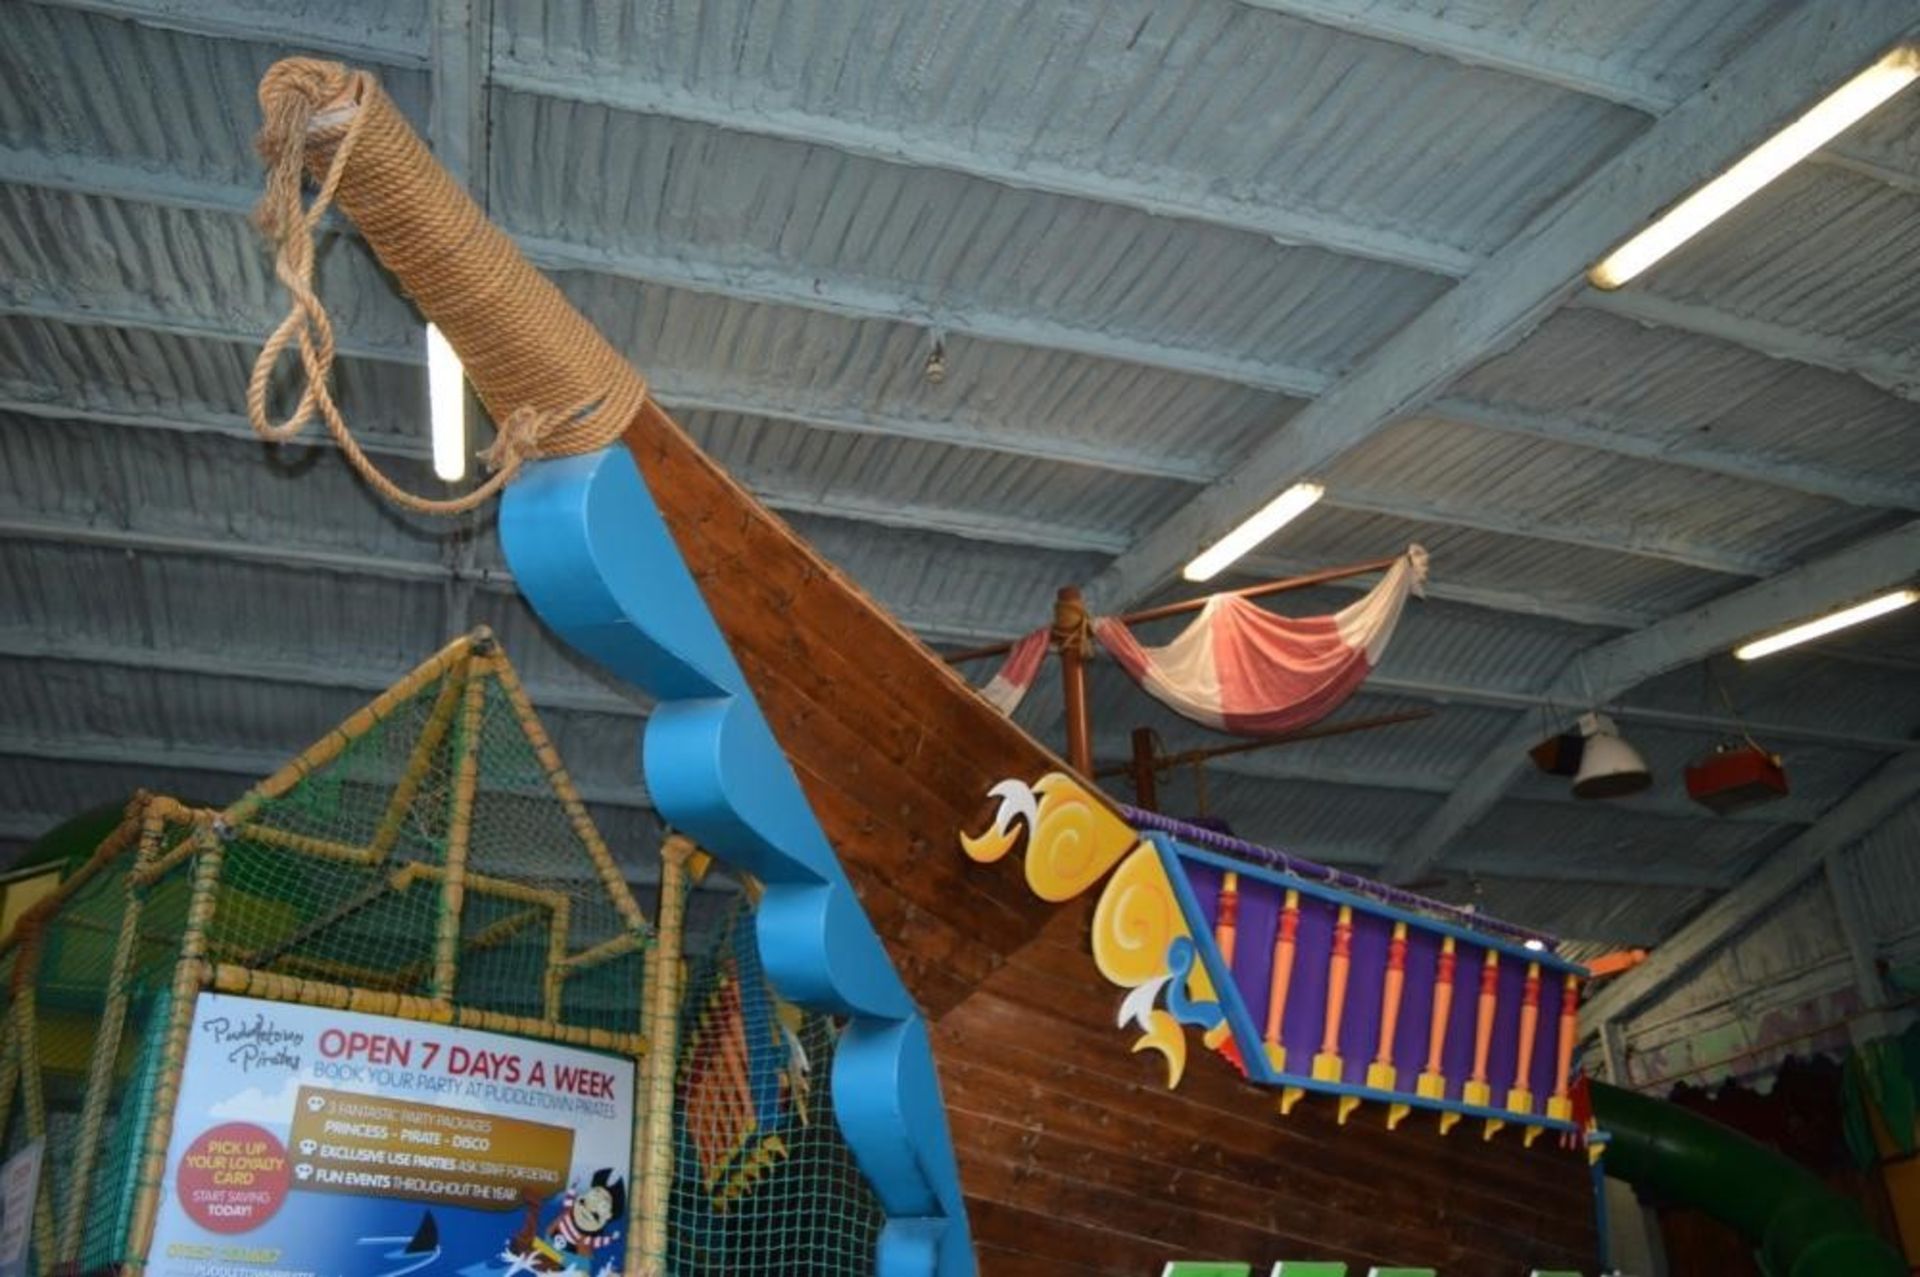 Botany Bay Puddletown Pirates Play Centre - The Only Pirate Themed Play Centre in the North West - F - Image 3 of 30